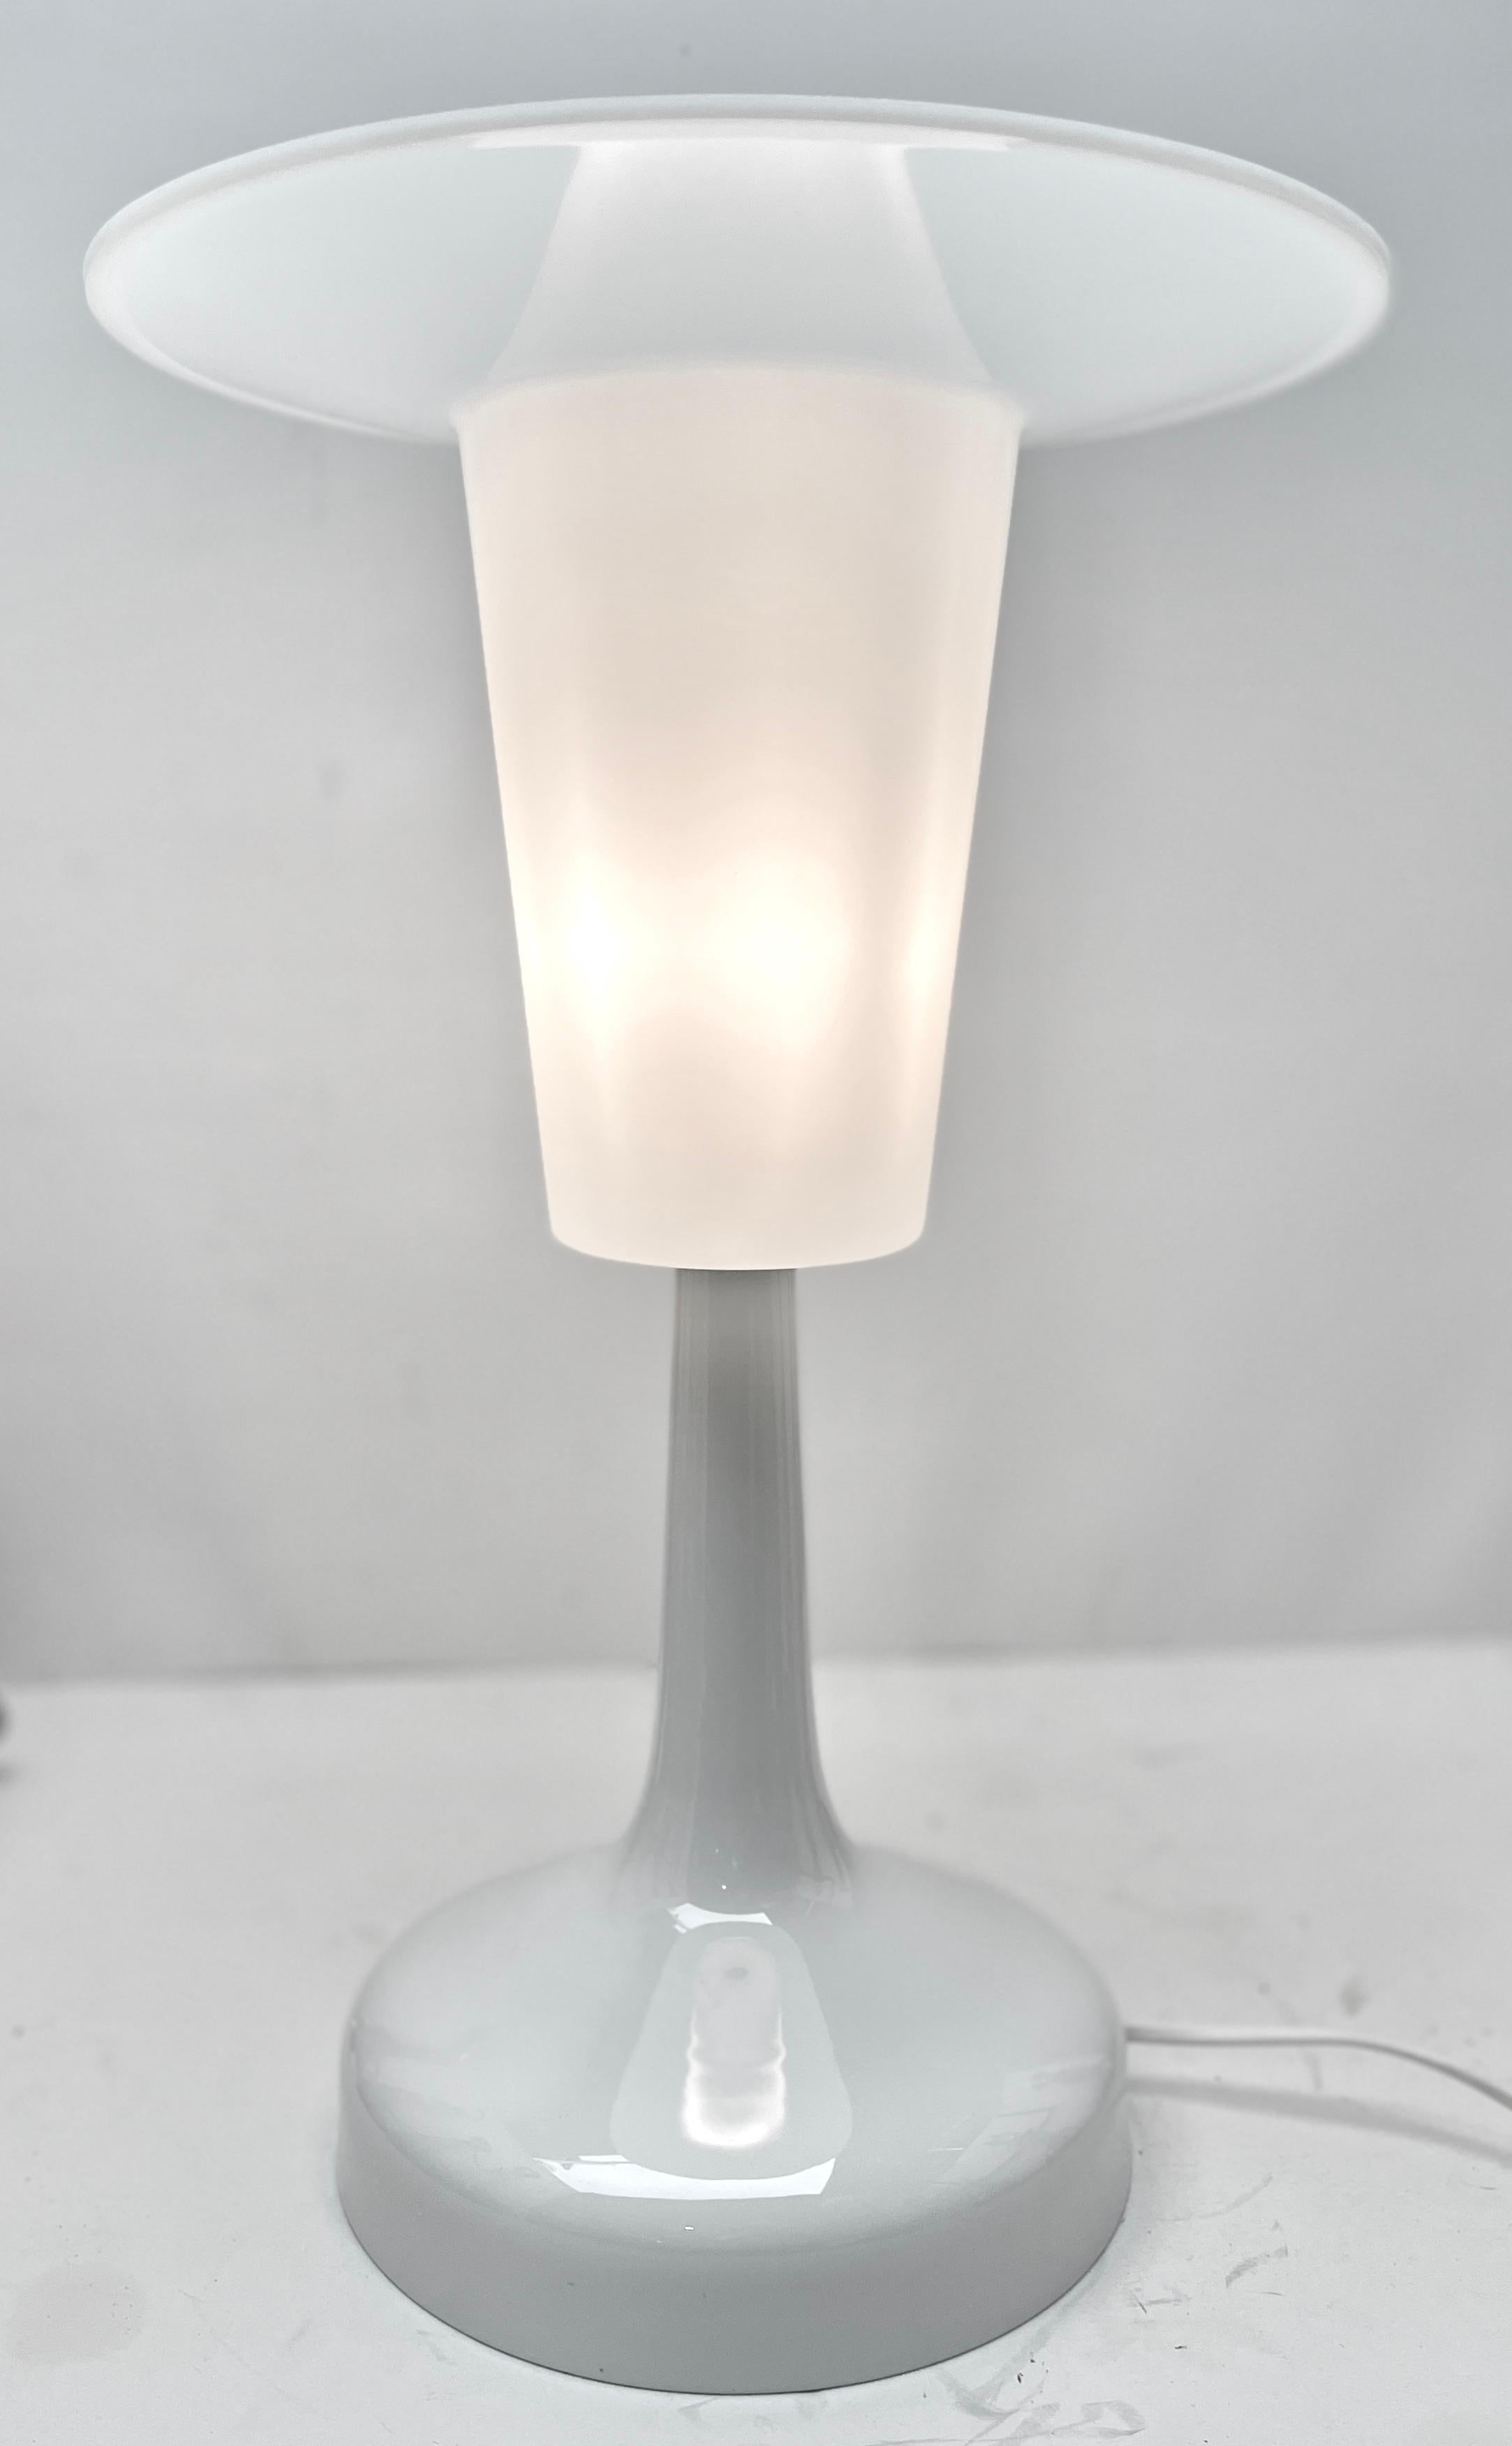 Classic compact design by Rosenthal, this spotlight desk lamp was produced by Rosenthal

The stand is White Porcelain the lamp is fully original and in good condition
and has been left unrestored.
In full working order, it has the larger standard